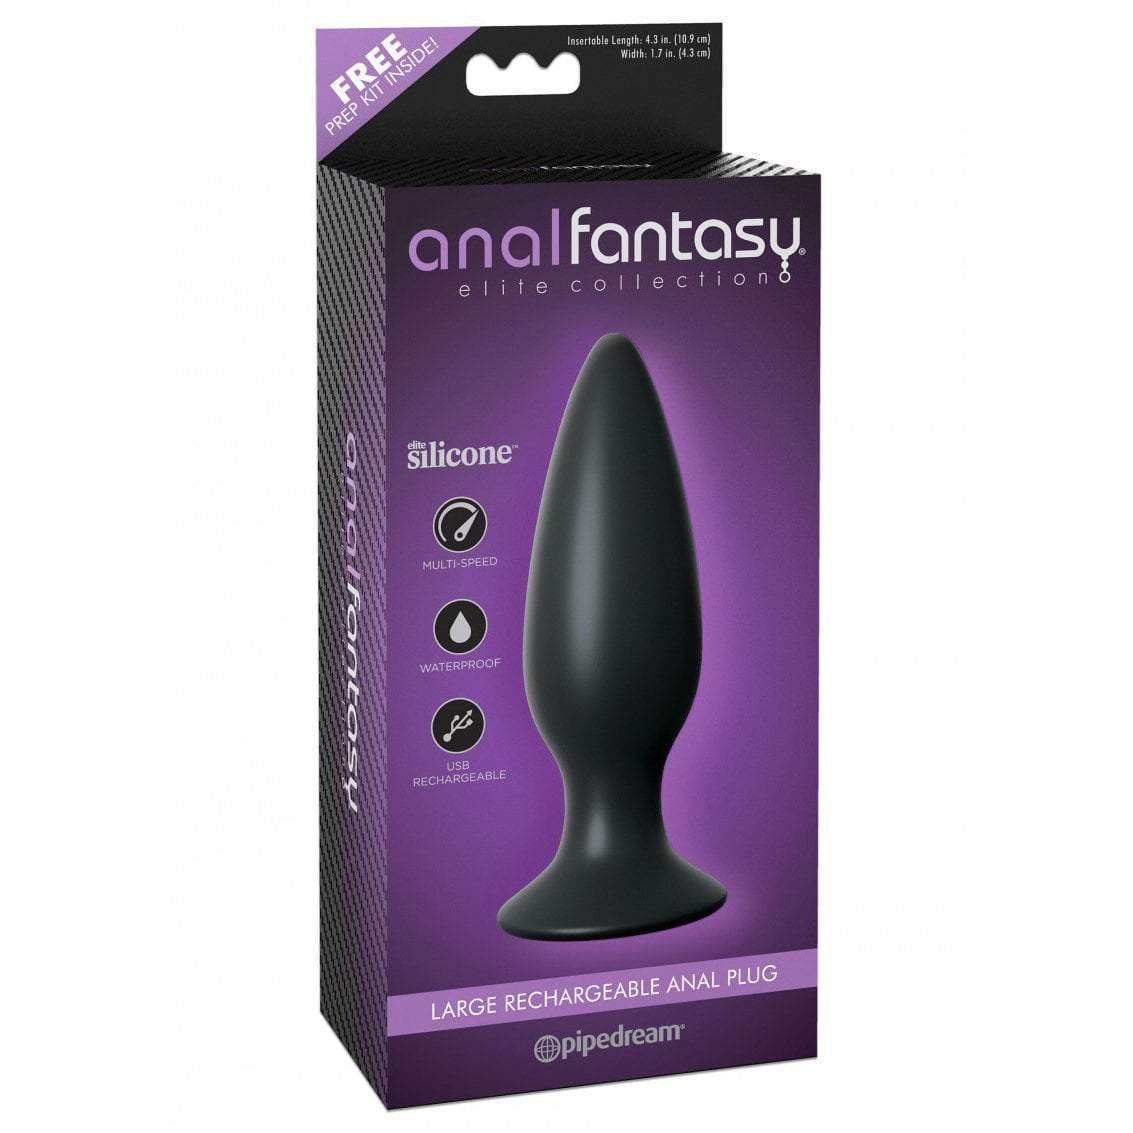 Pipedream - Anal Fantasy Elite Collection Rechargeable Anal Plug Large (Black) -  Anal Beads (Vibration) Rechargeable  Durio.sg